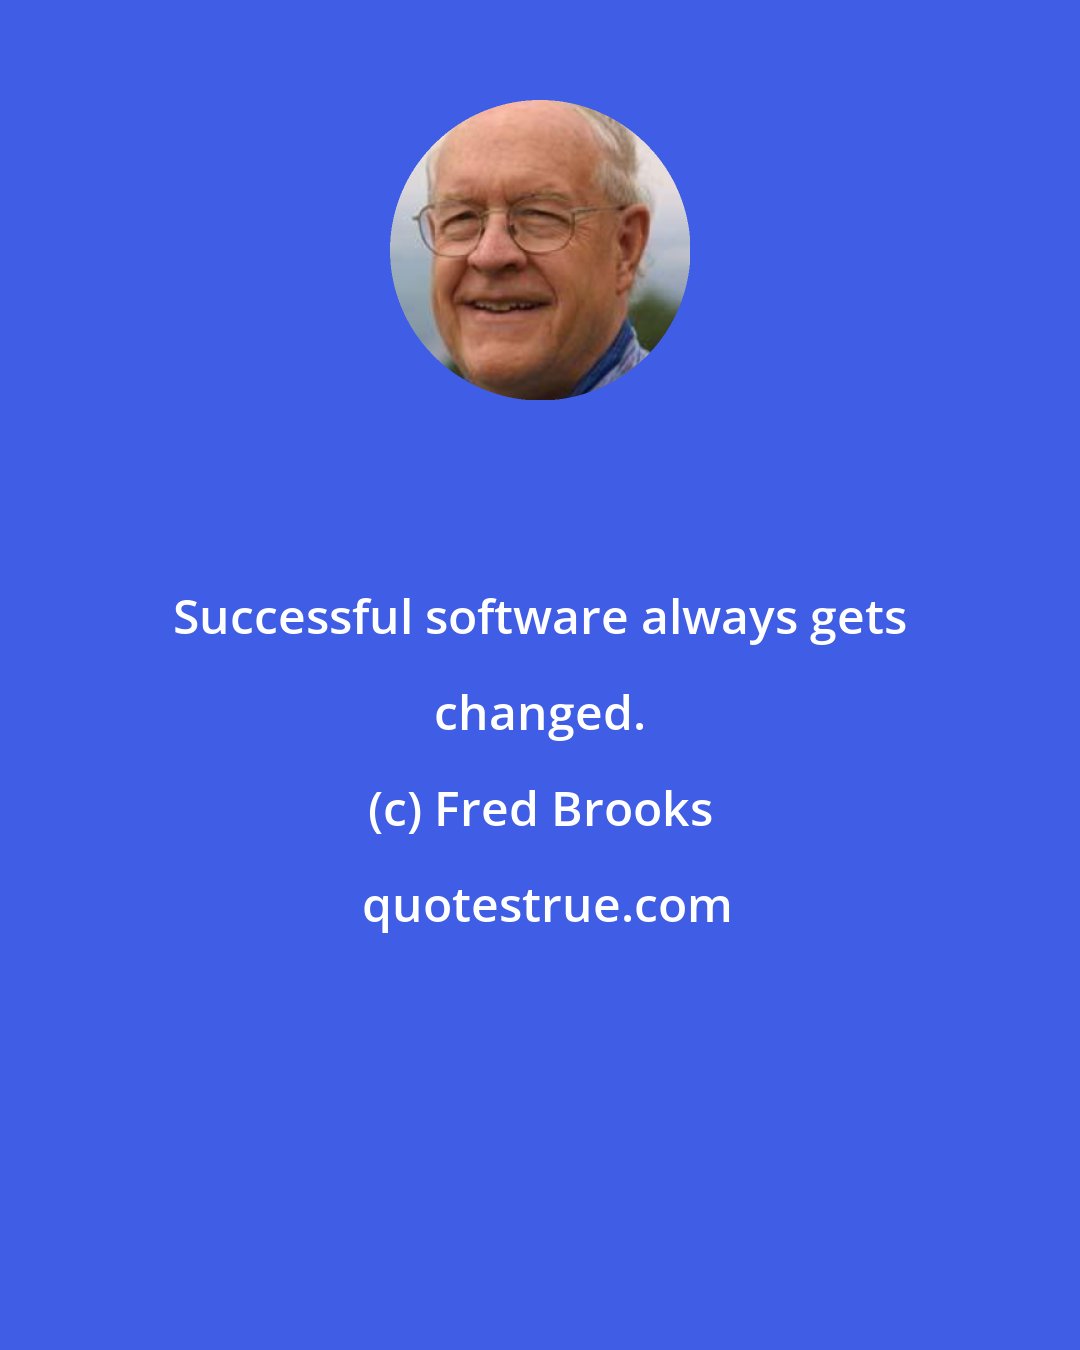 Fred Brooks: Successful software always gets changed.